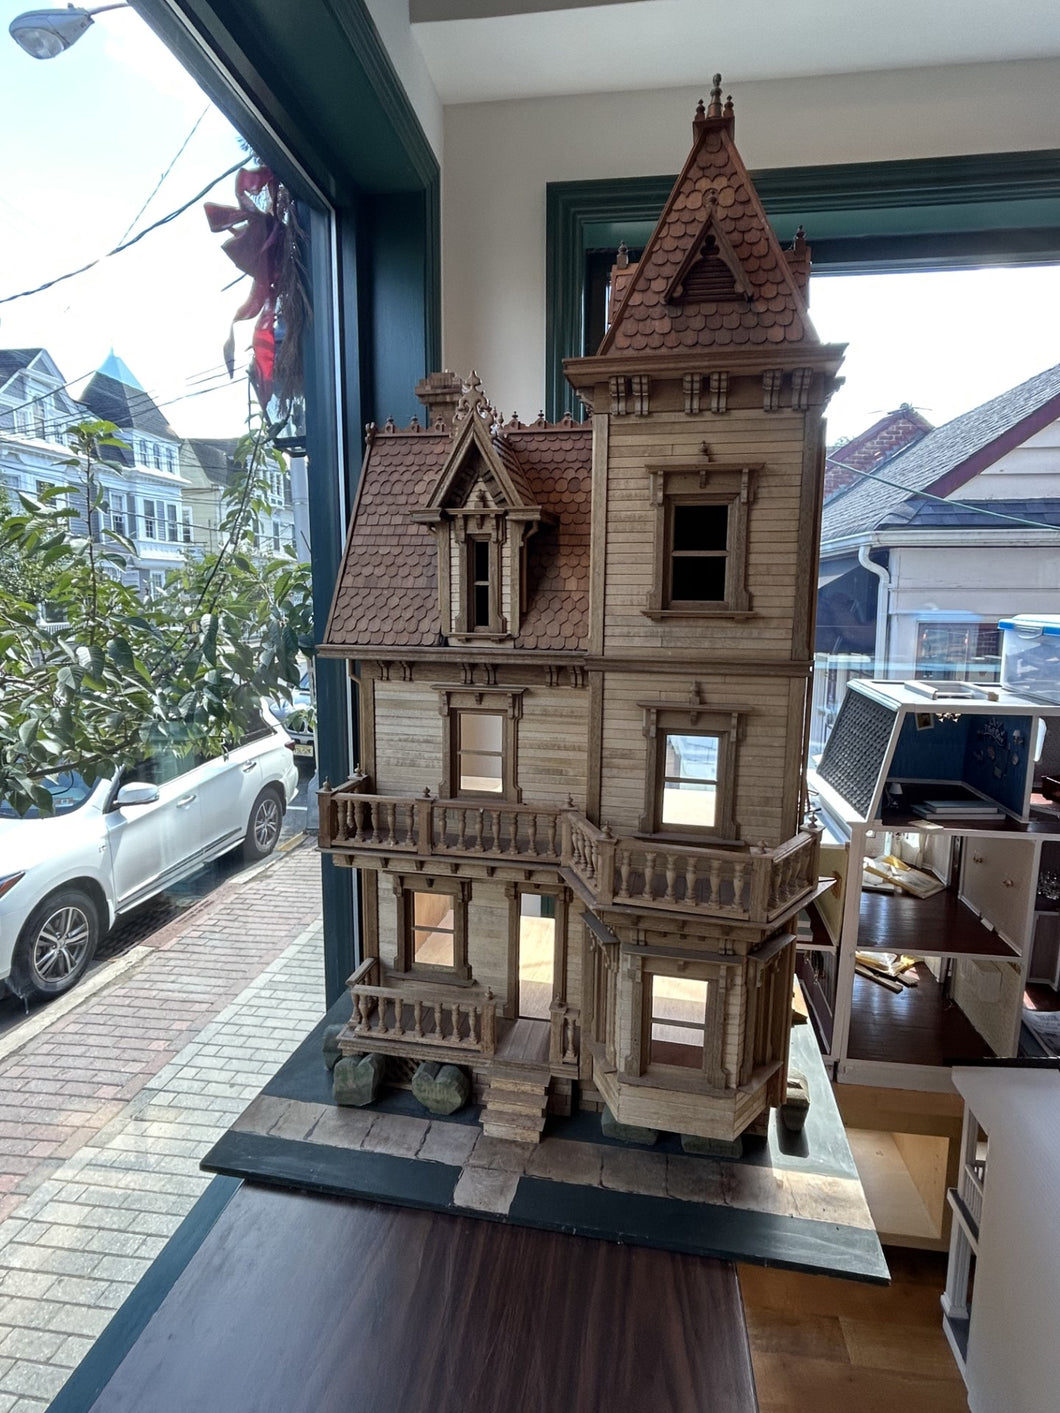 6 Room Gothic Style Victorian Dollhouse